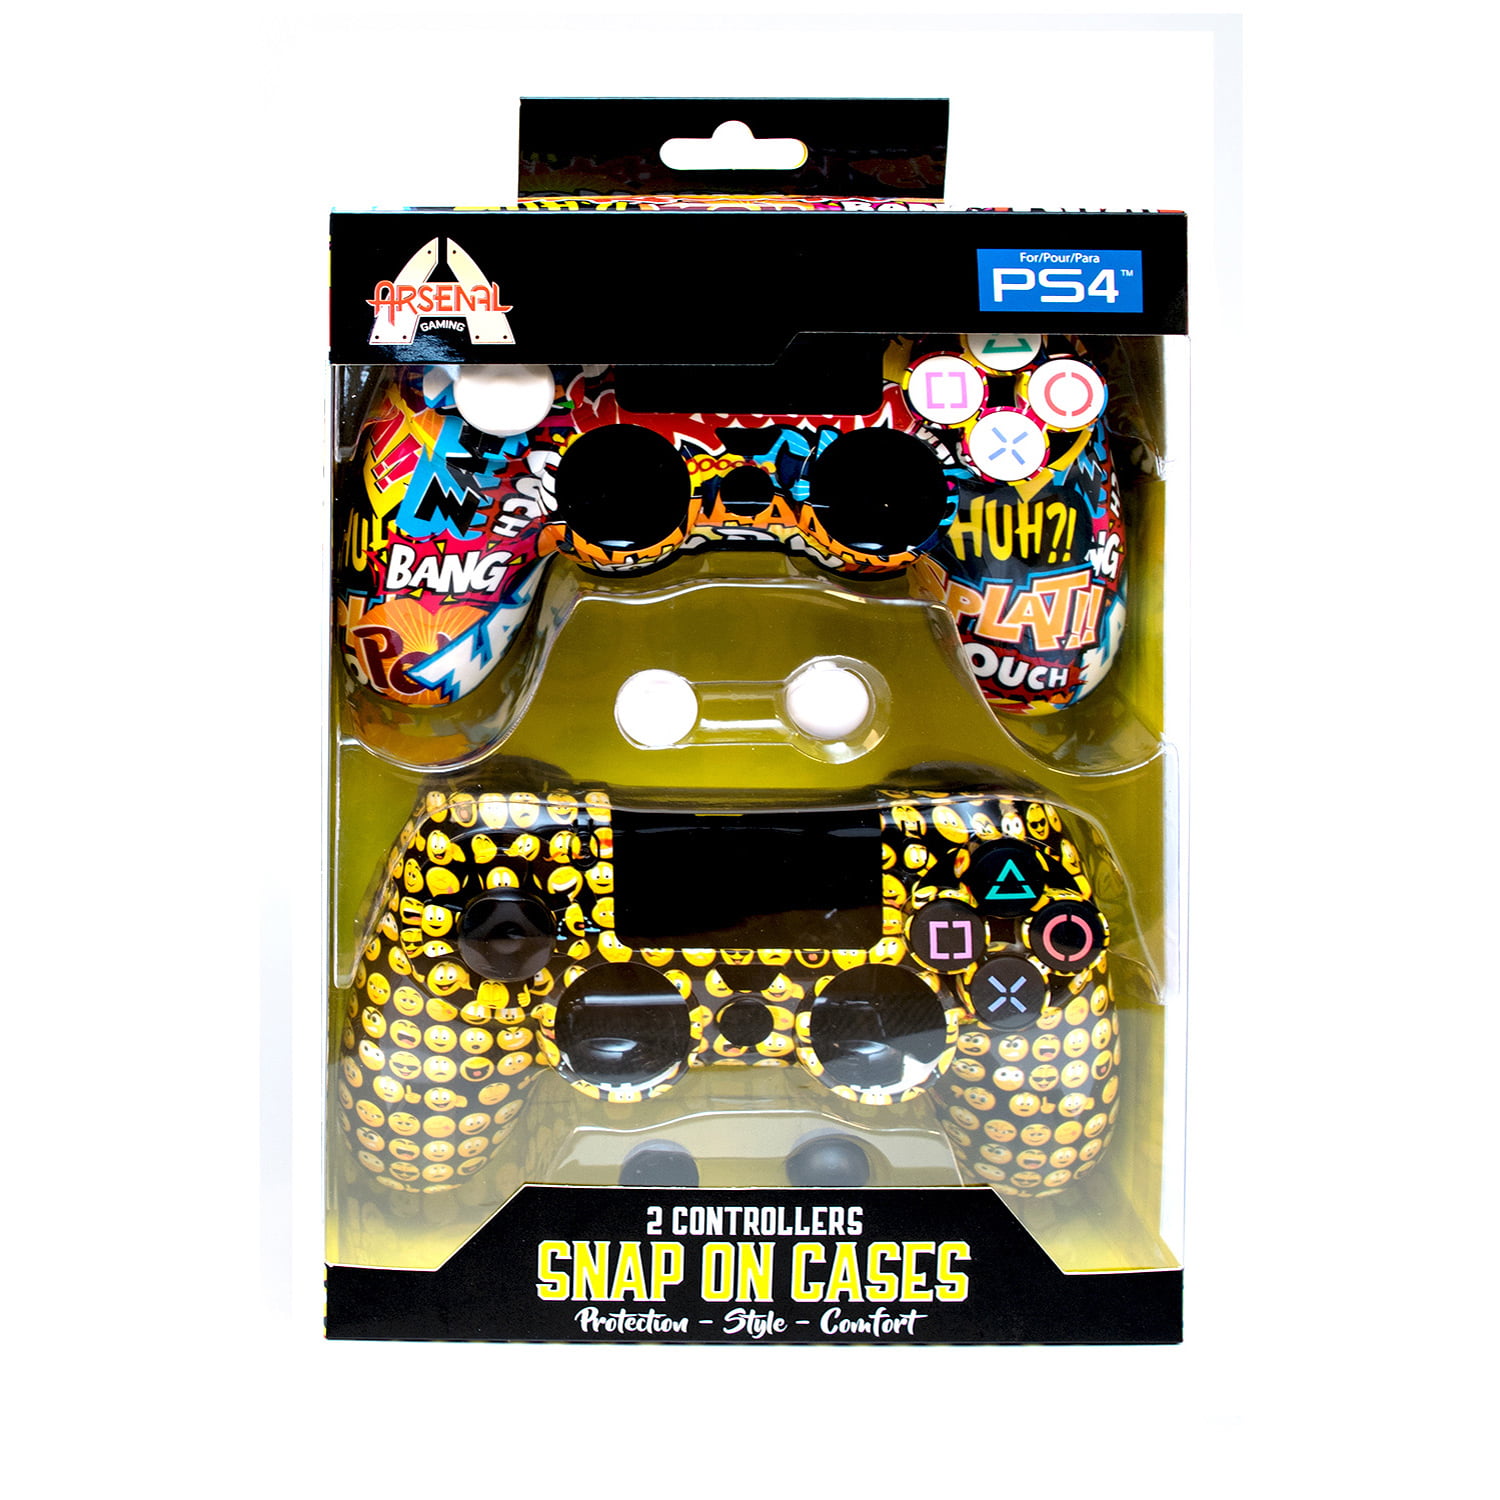 Arsenal Gaming Snap-on Cases for PS4 Controller: and Emoji Designs -